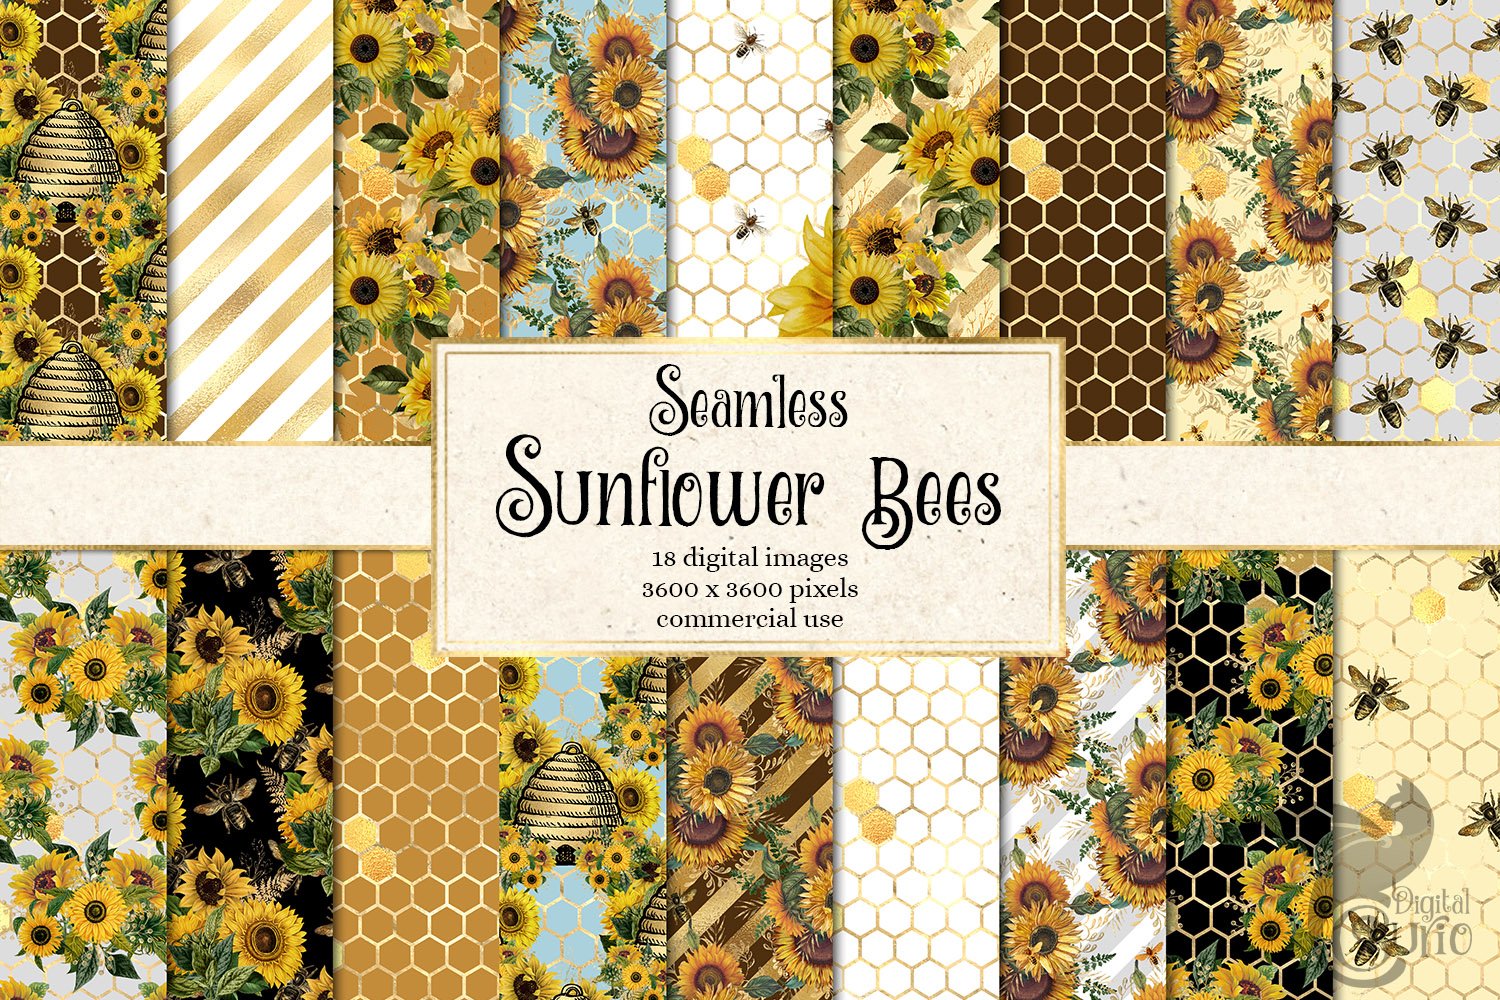 Sunflower Bee Digital Paper cover image.